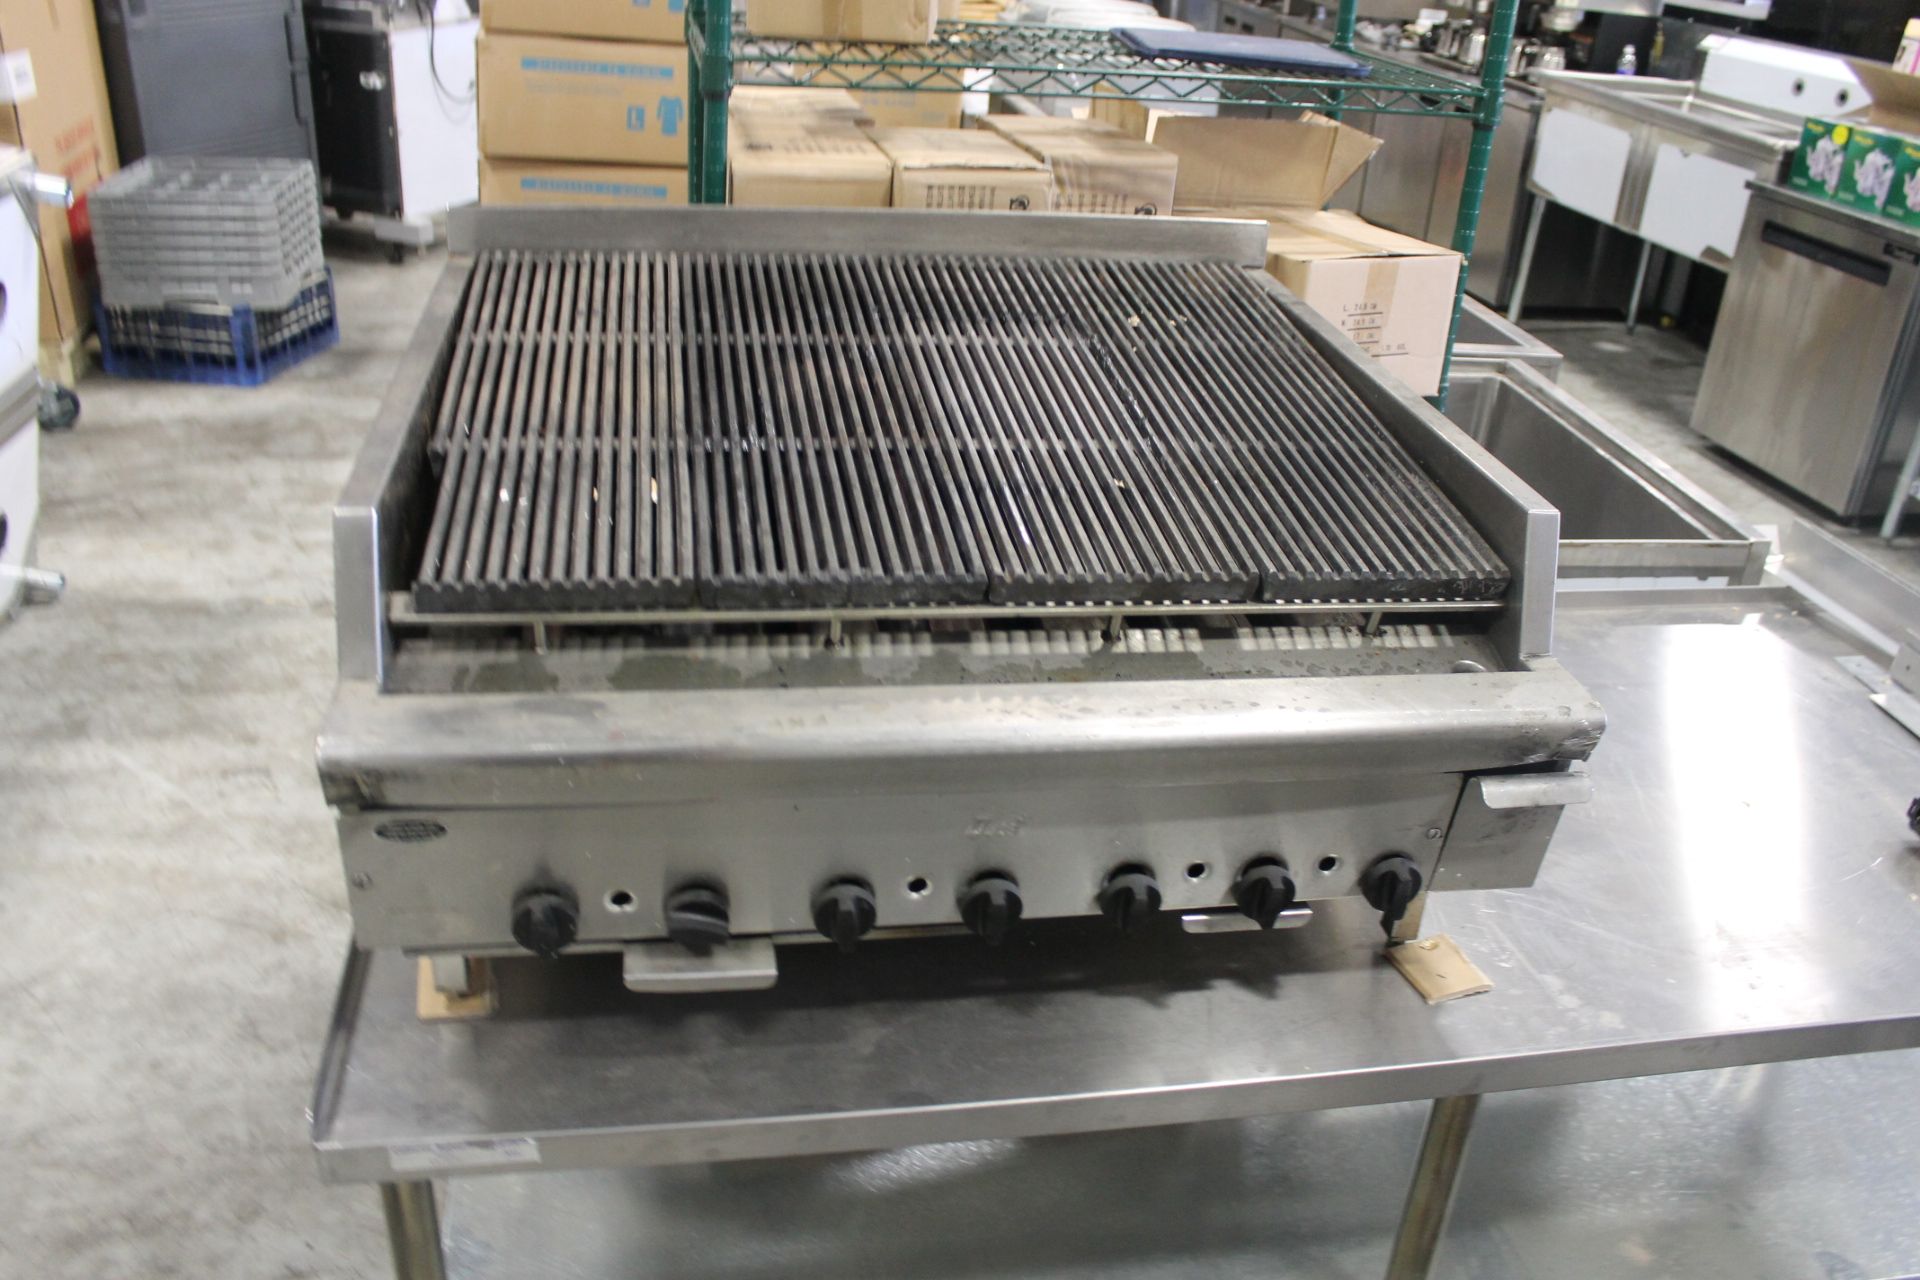 Quest 36" Charbroiler